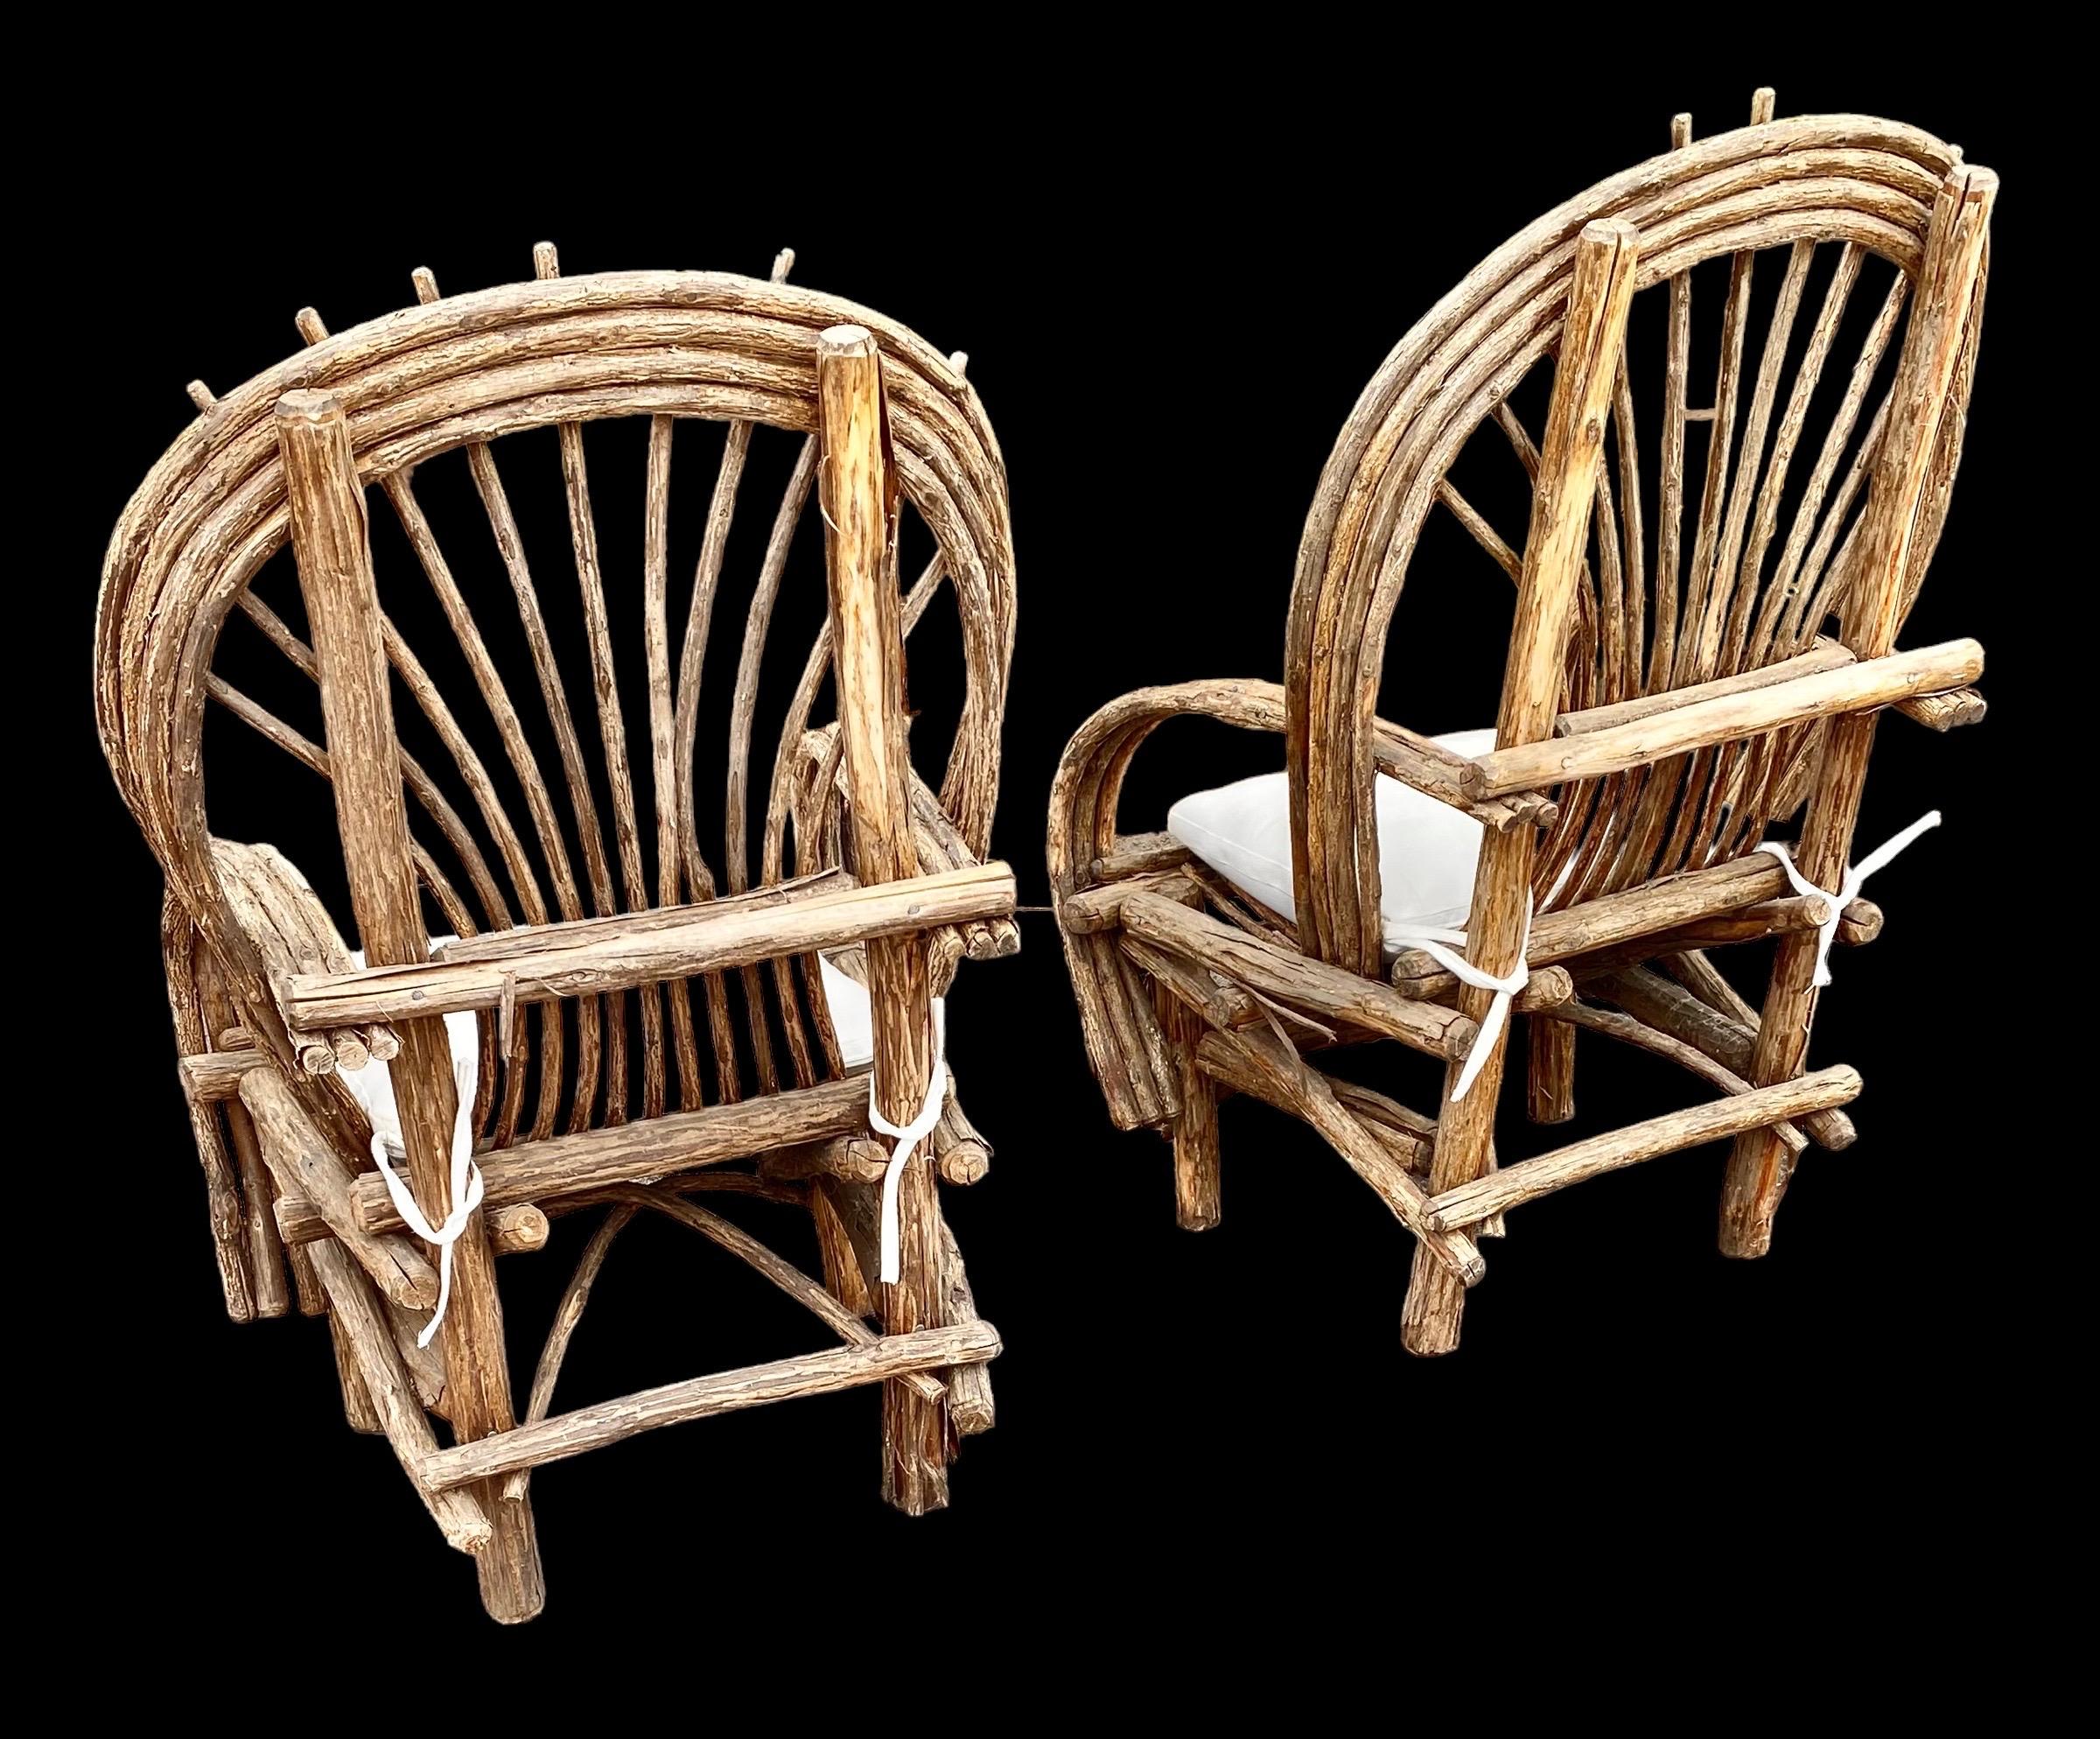 bent willow chairs